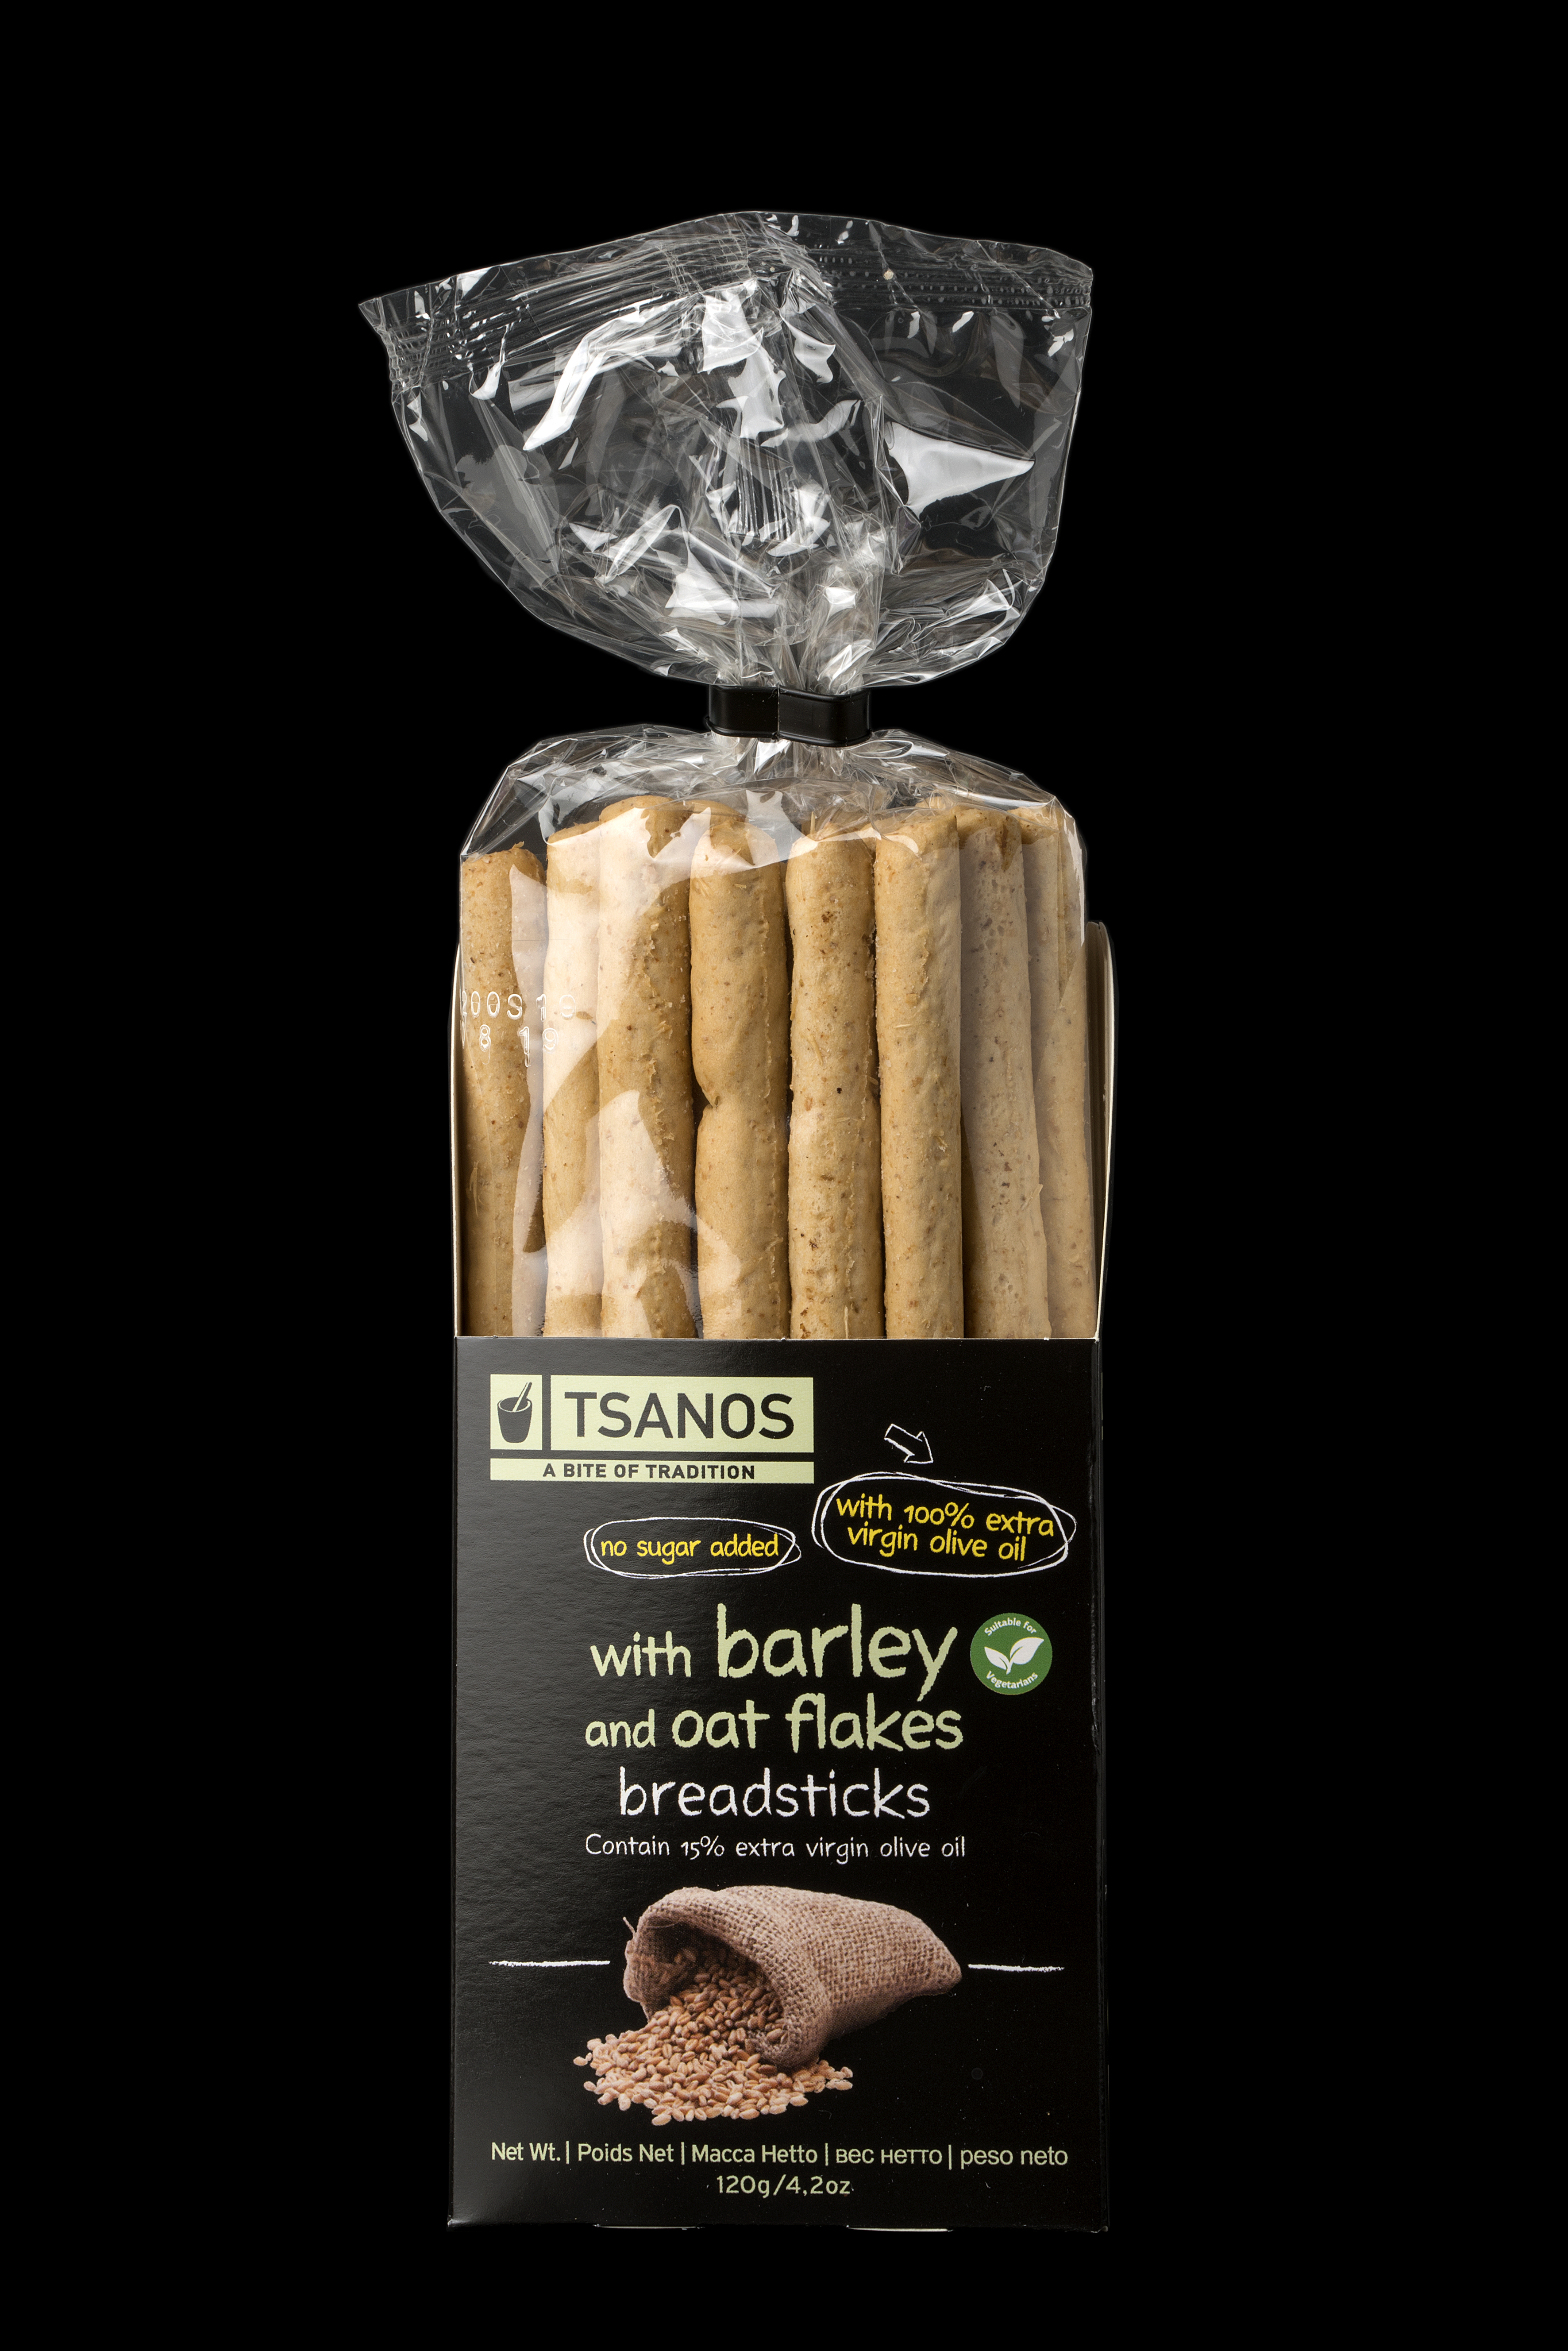 Breadsticks with barley and oat flakes